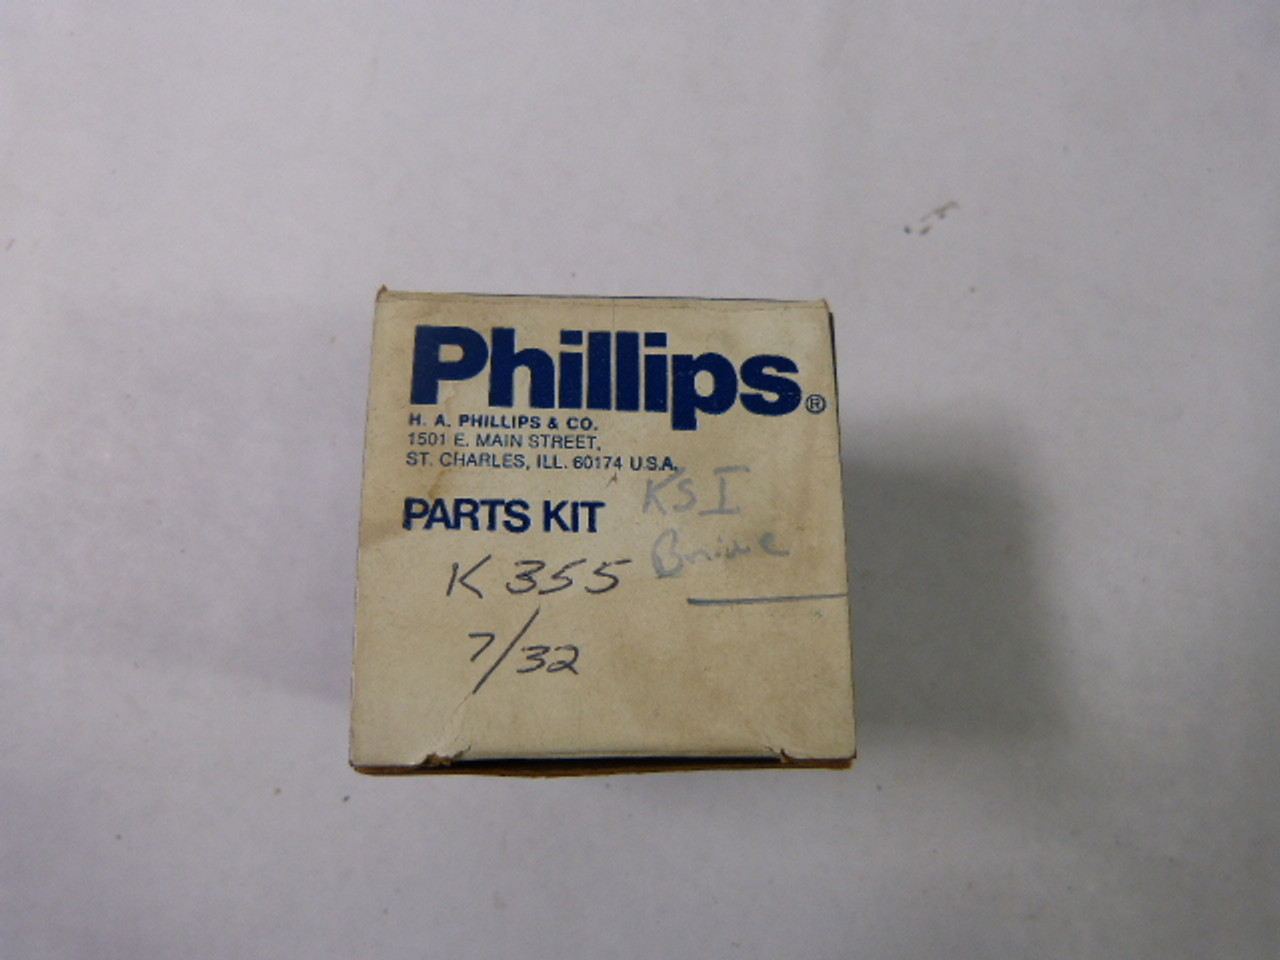 Phillips K355-9/32 Refrigeration Parts Kit Replacement ! NEW !